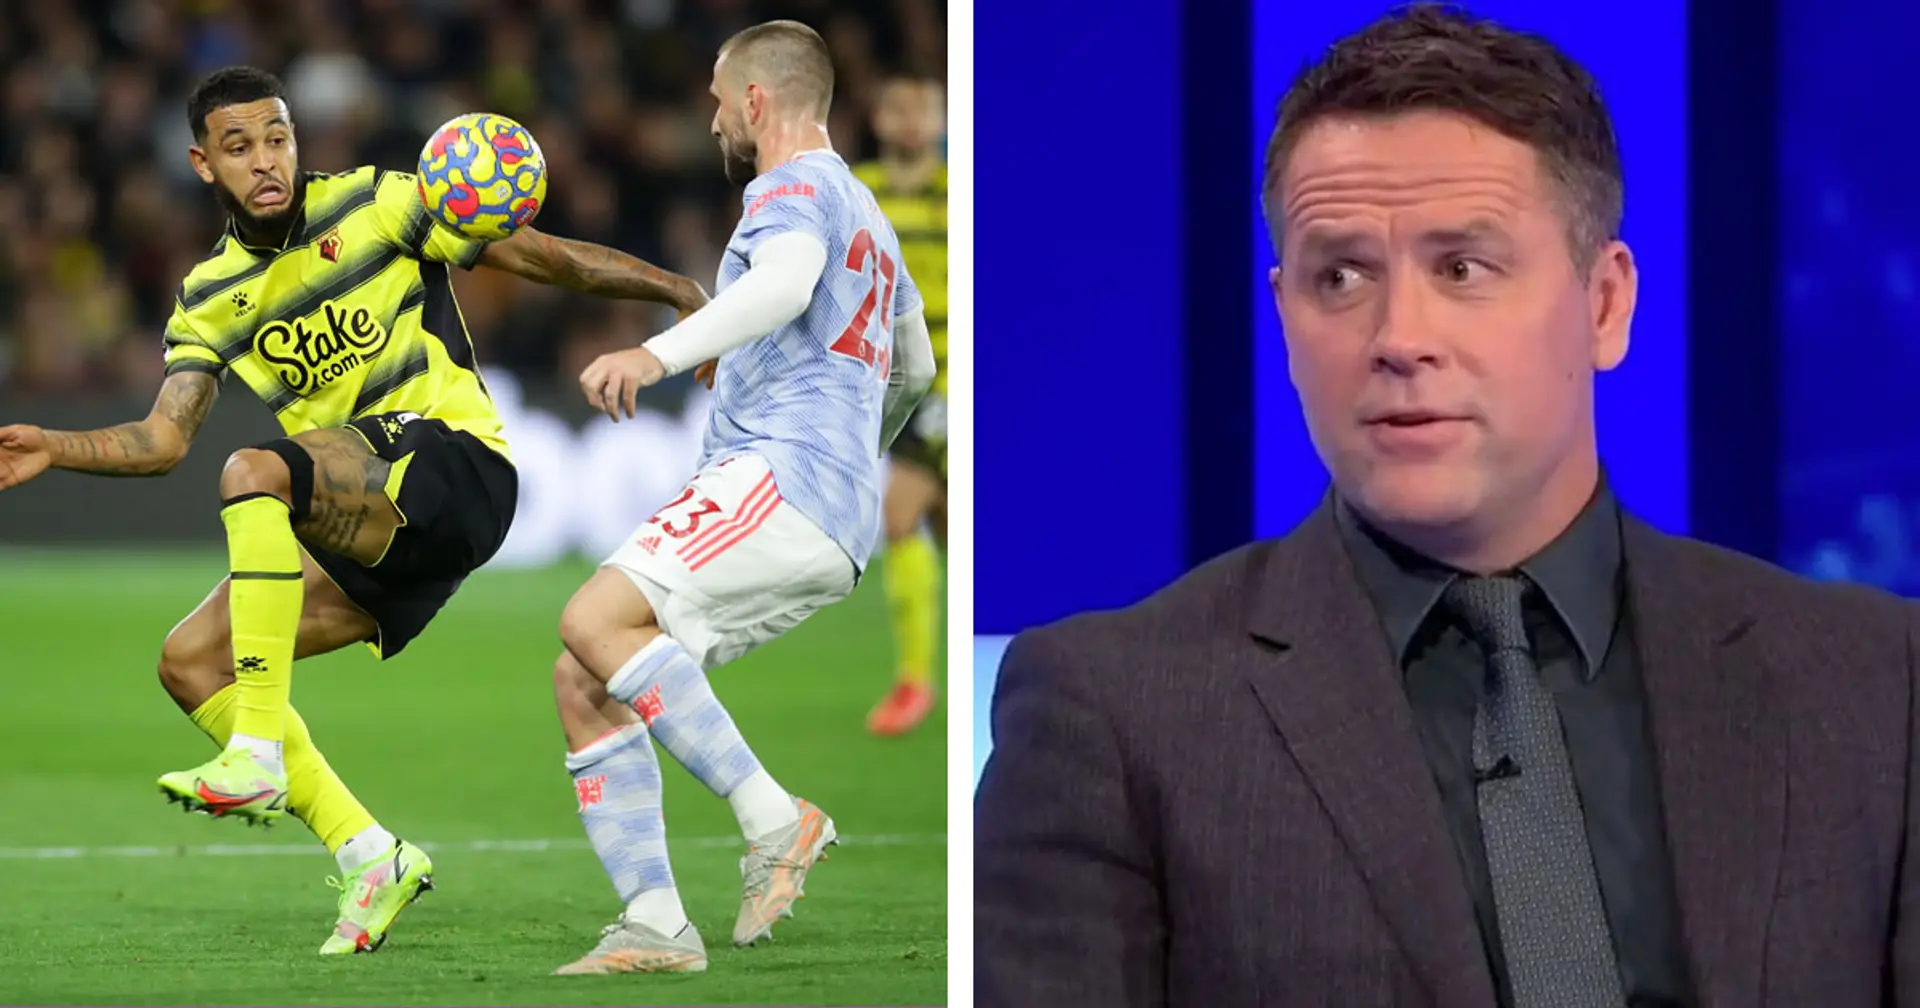 'I don't think United are playing well at the minute': Michael Owen makes prediction for Man United-Watford clash